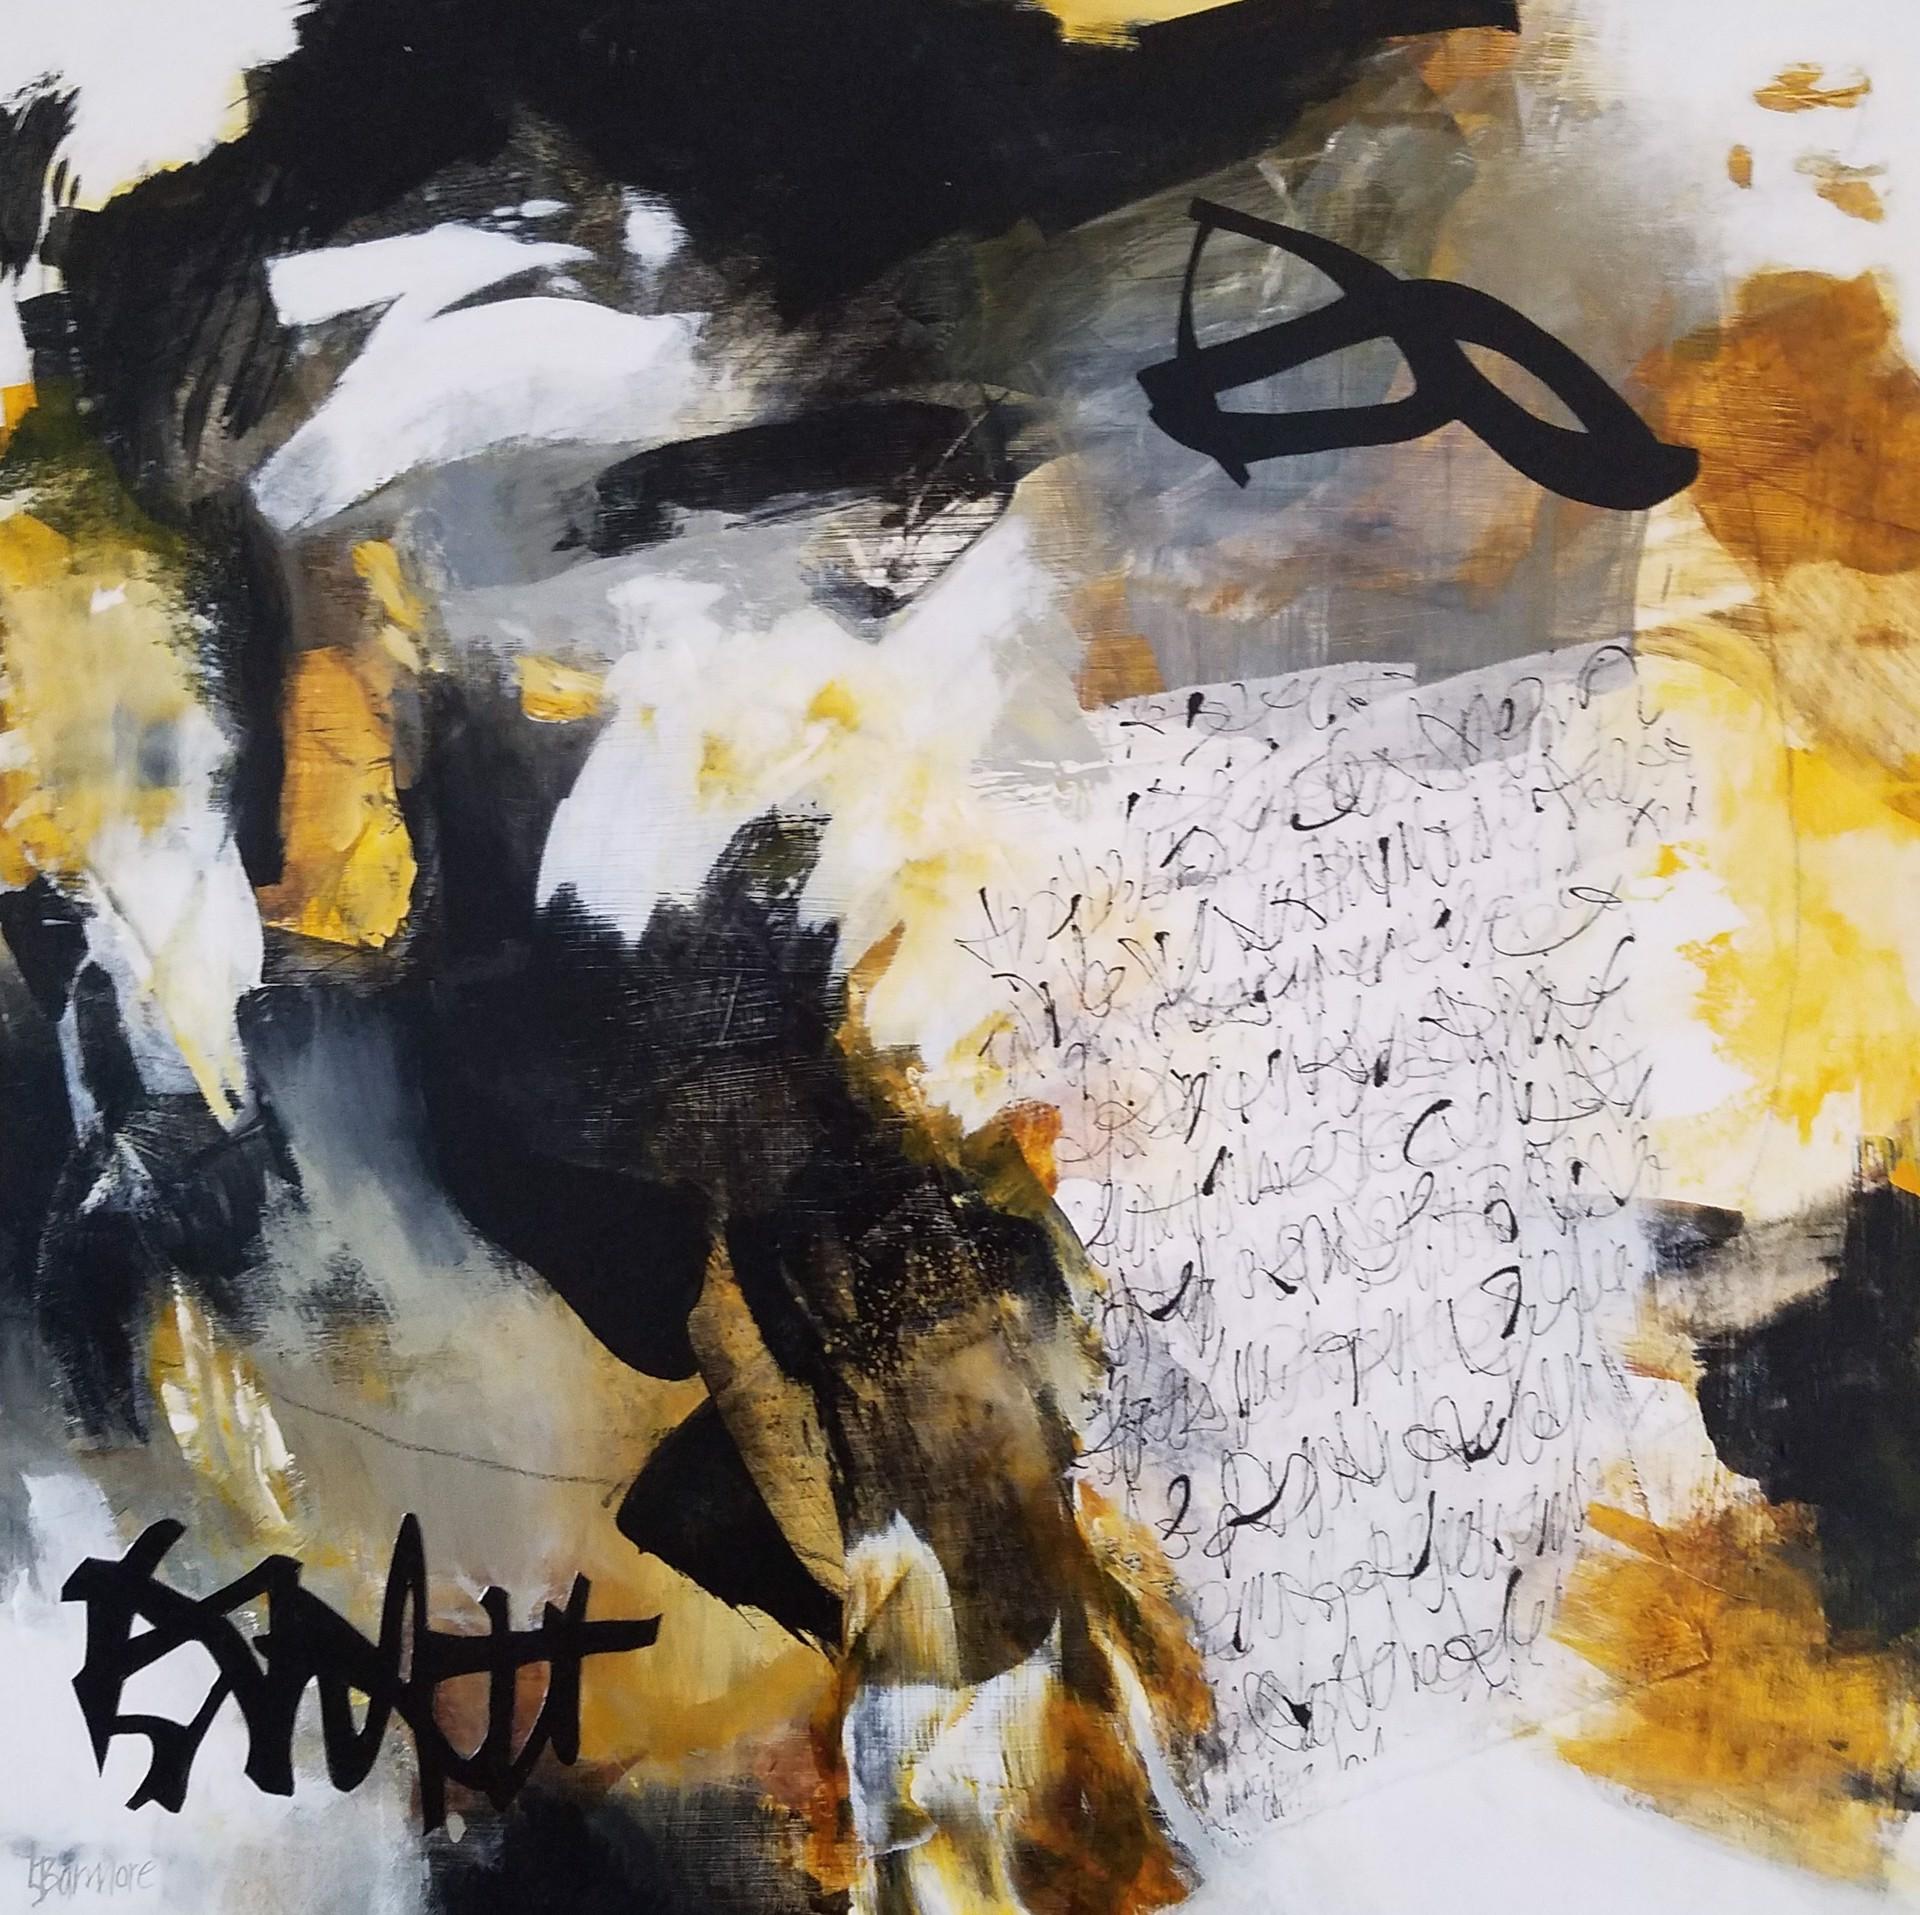 In this work by Laurie Barmore, the artist's hand is exceedingly present. Using strong strokes of black creates its own essences of form atop washes of whites, yellow and rust. Spilling between and binding fore and background, the artist creates